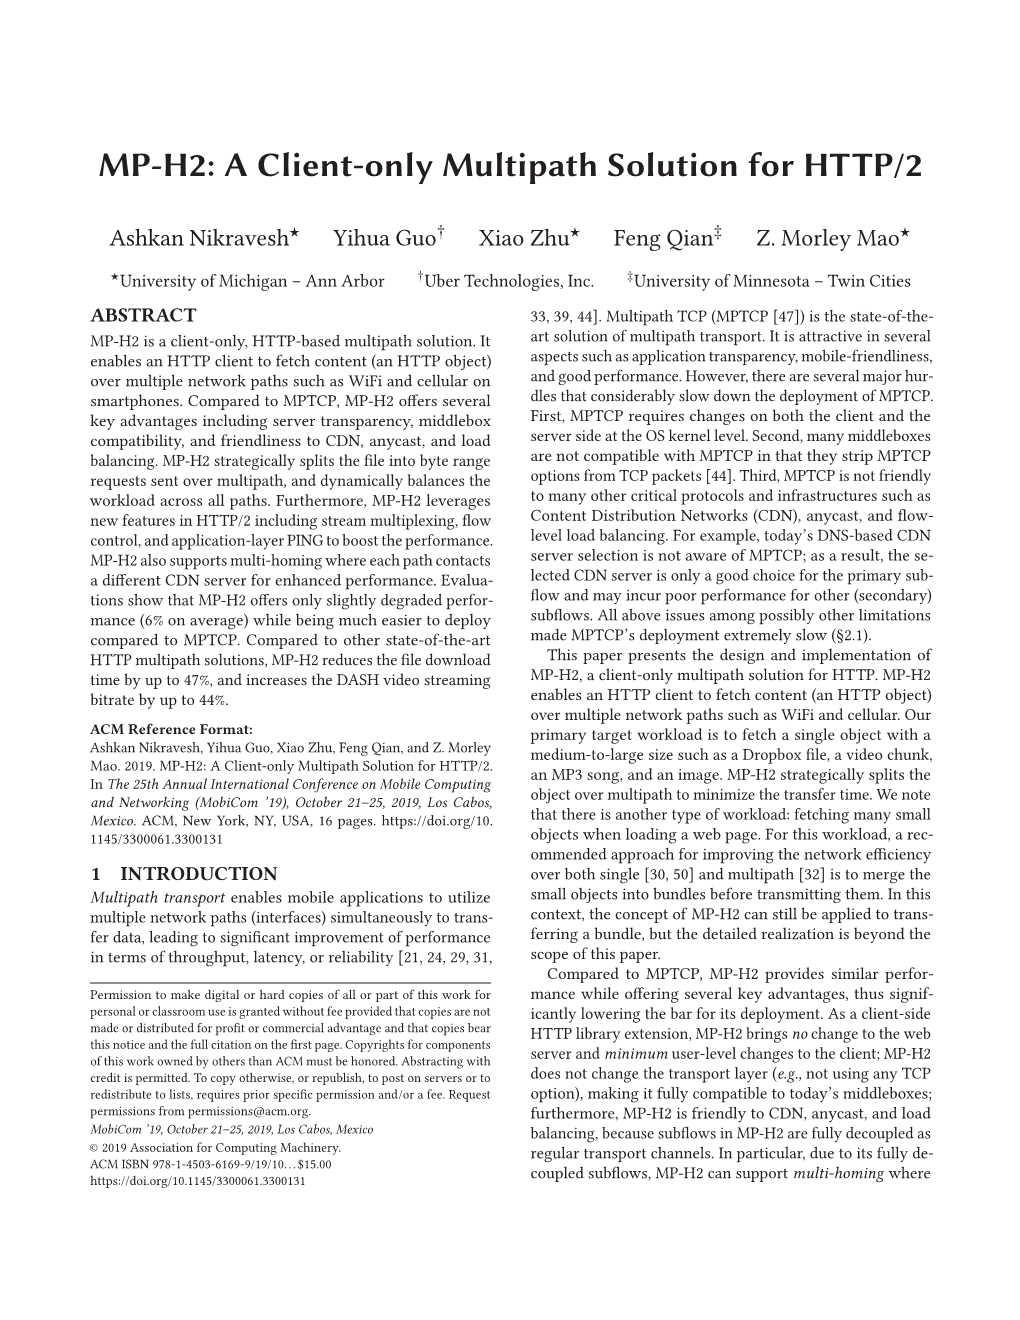 MP-H2: a Client-Only Multipath Solution for HTTP/2